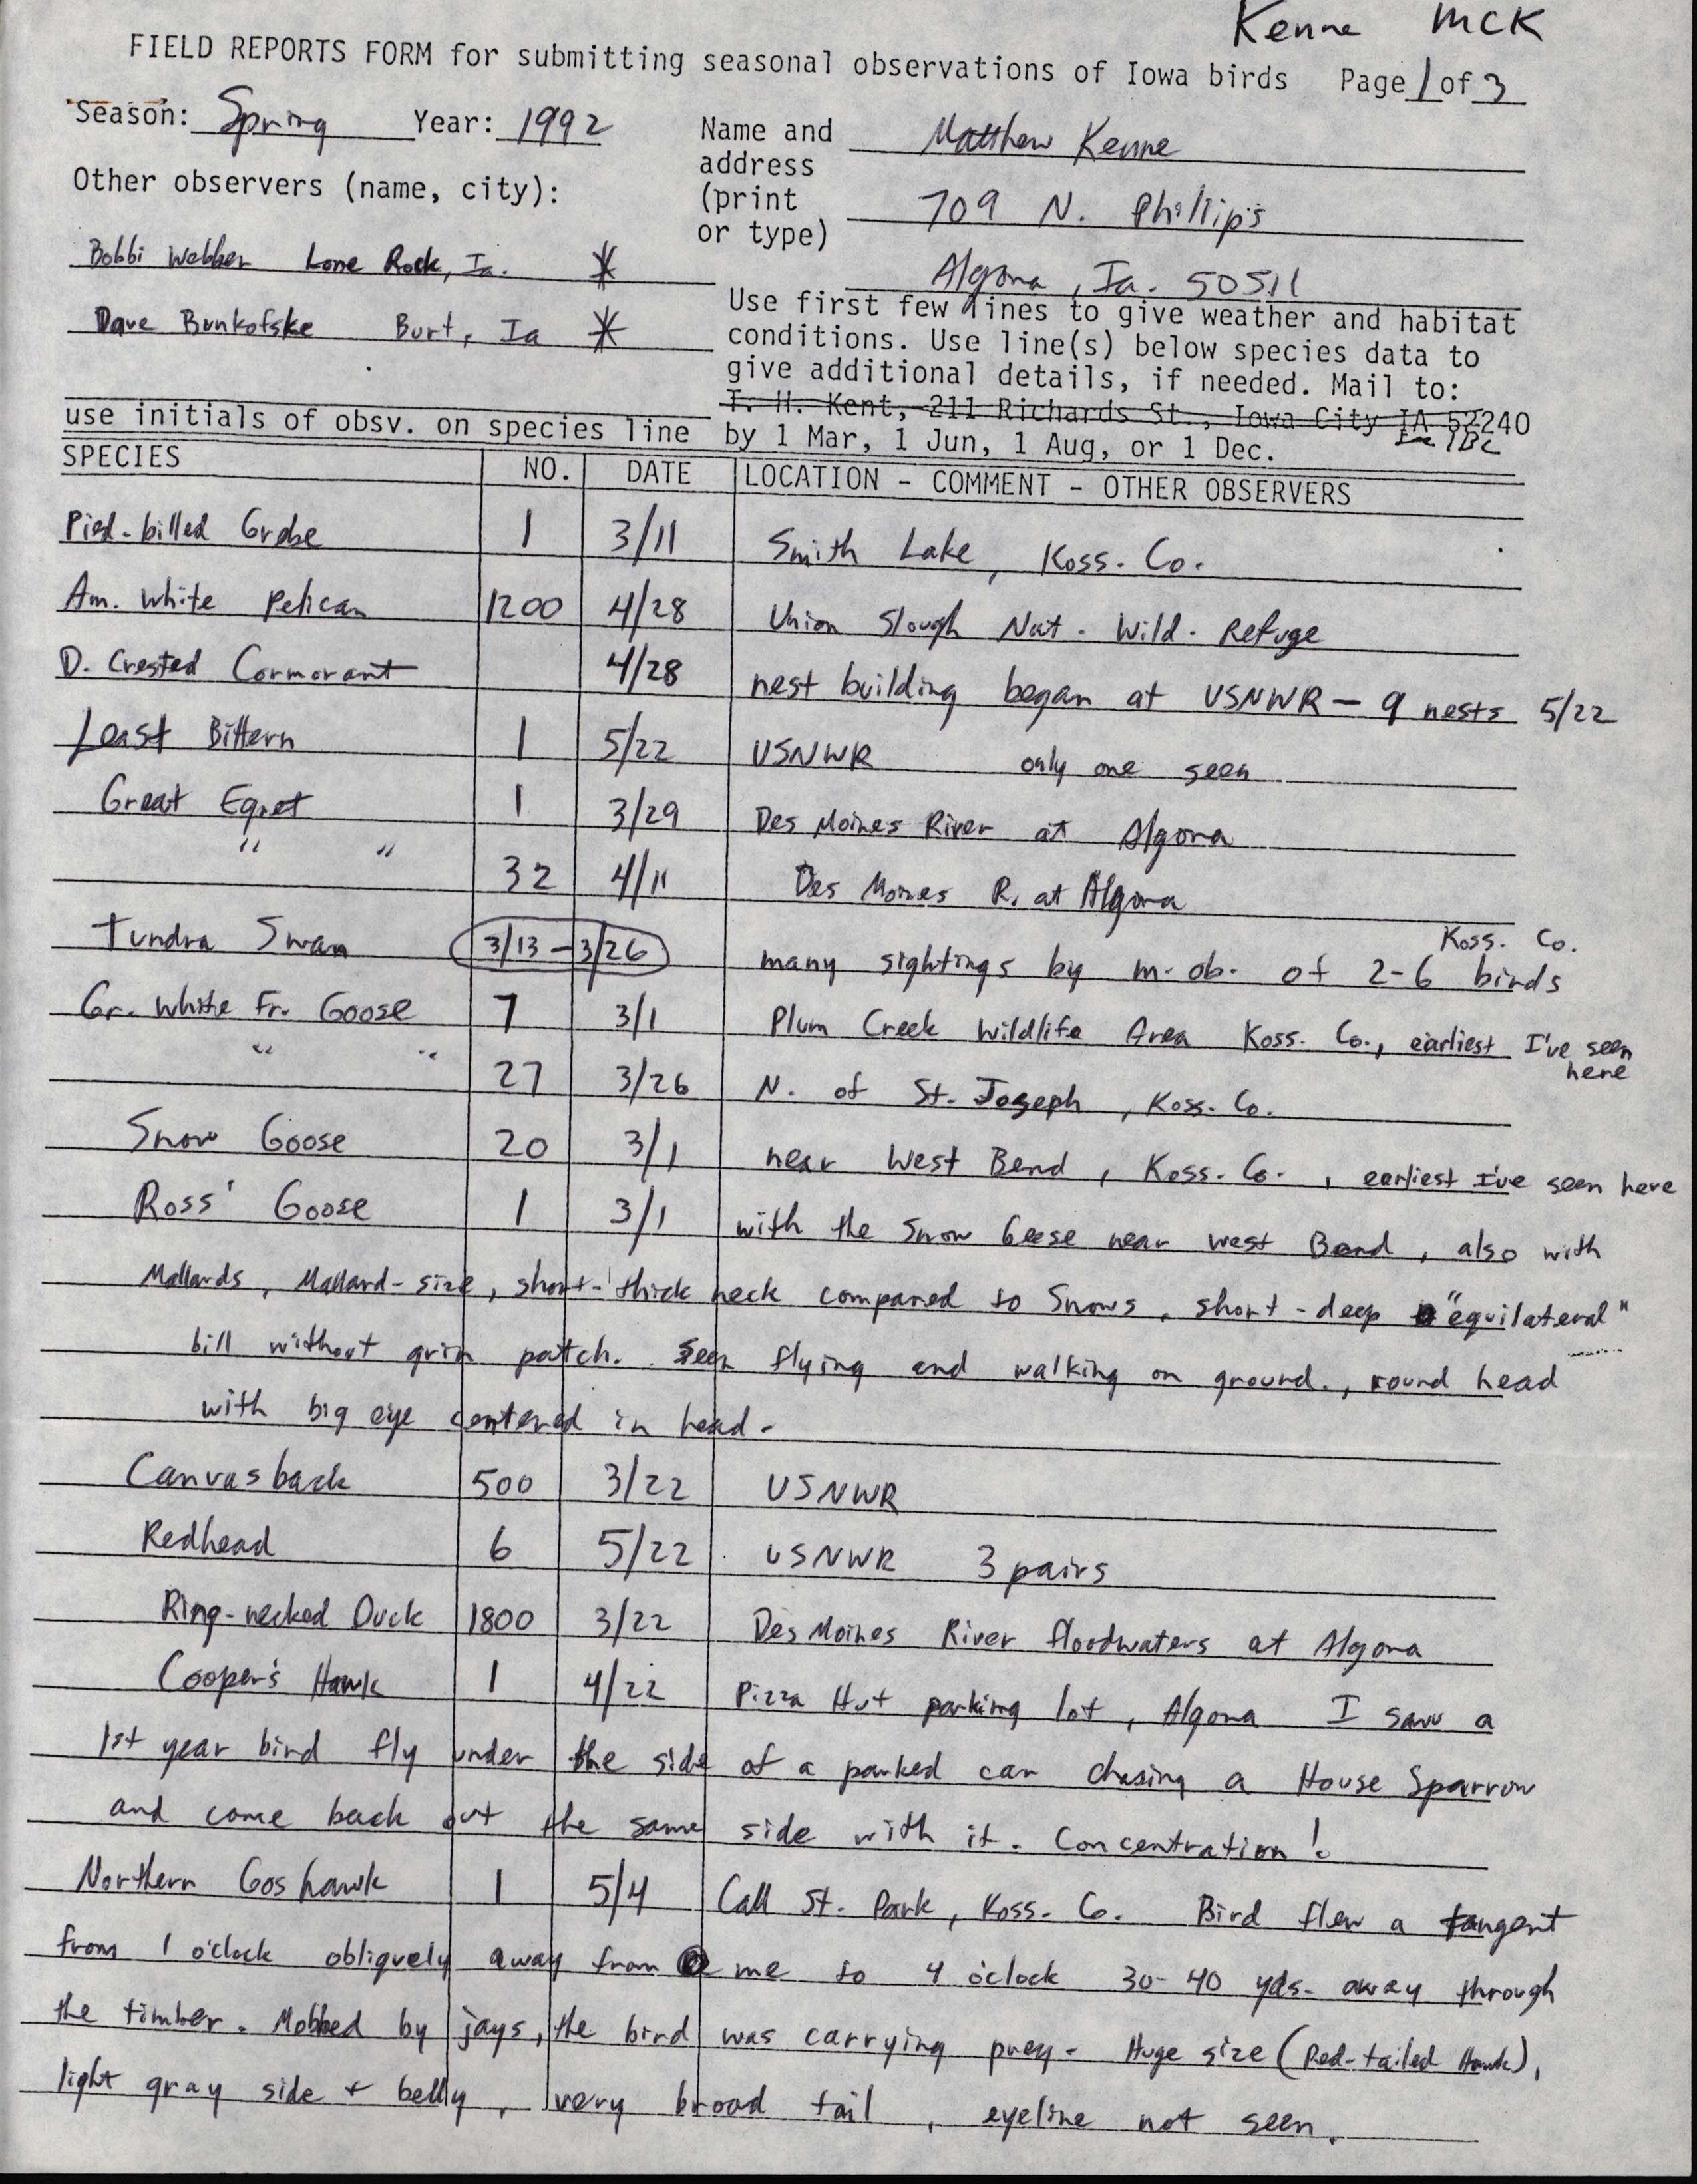 Field reports form for submitting seasonal observations of Iowa birds, Matthew Kenne, spring 1992